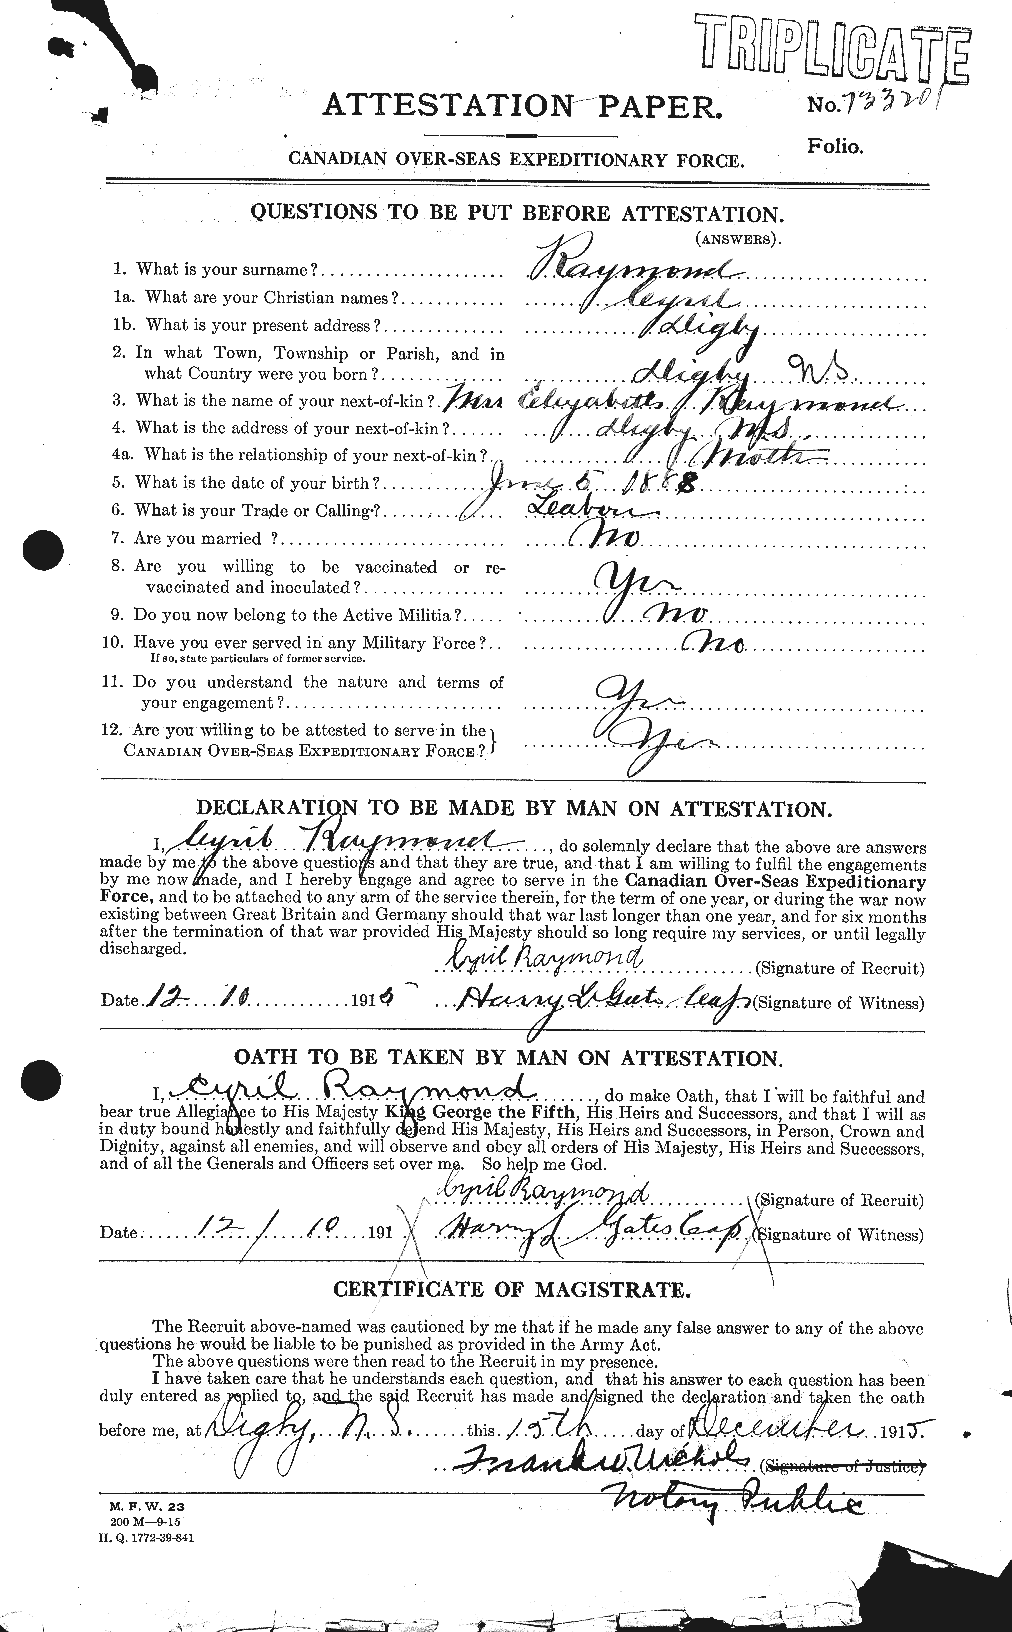 Personnel Records of the First World War - CEF 595287a